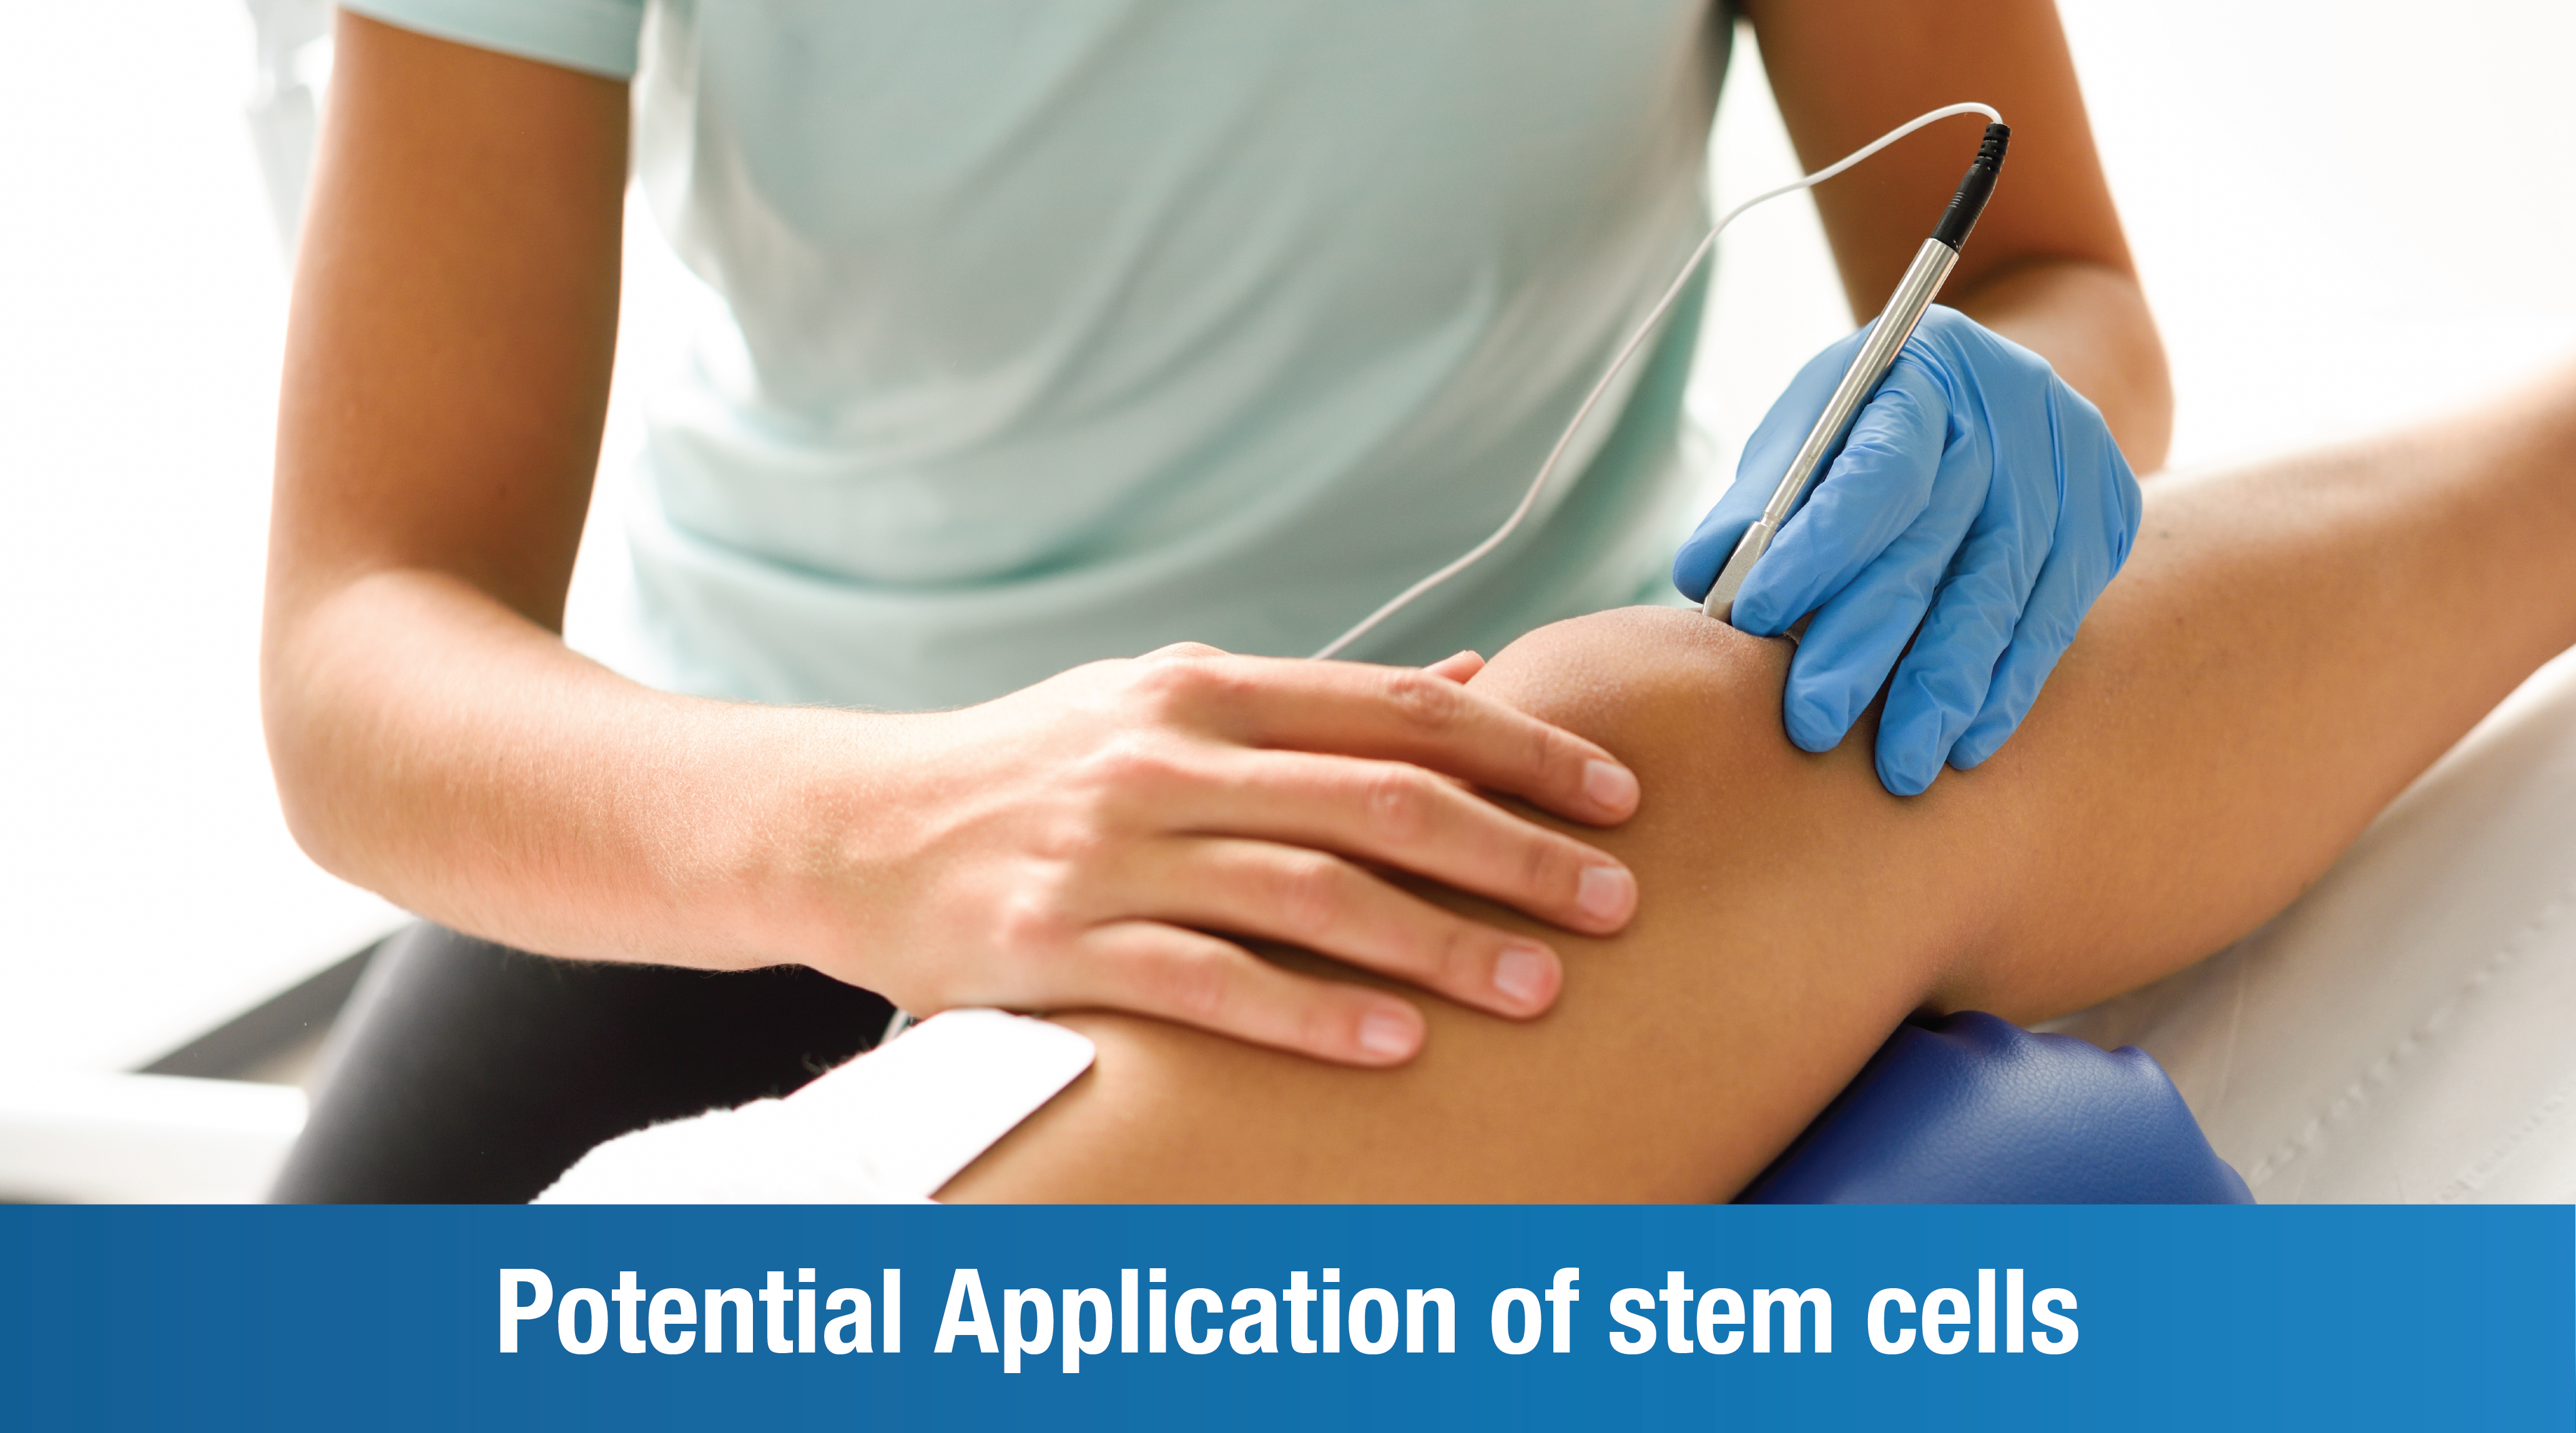 Potential applications of stem cells